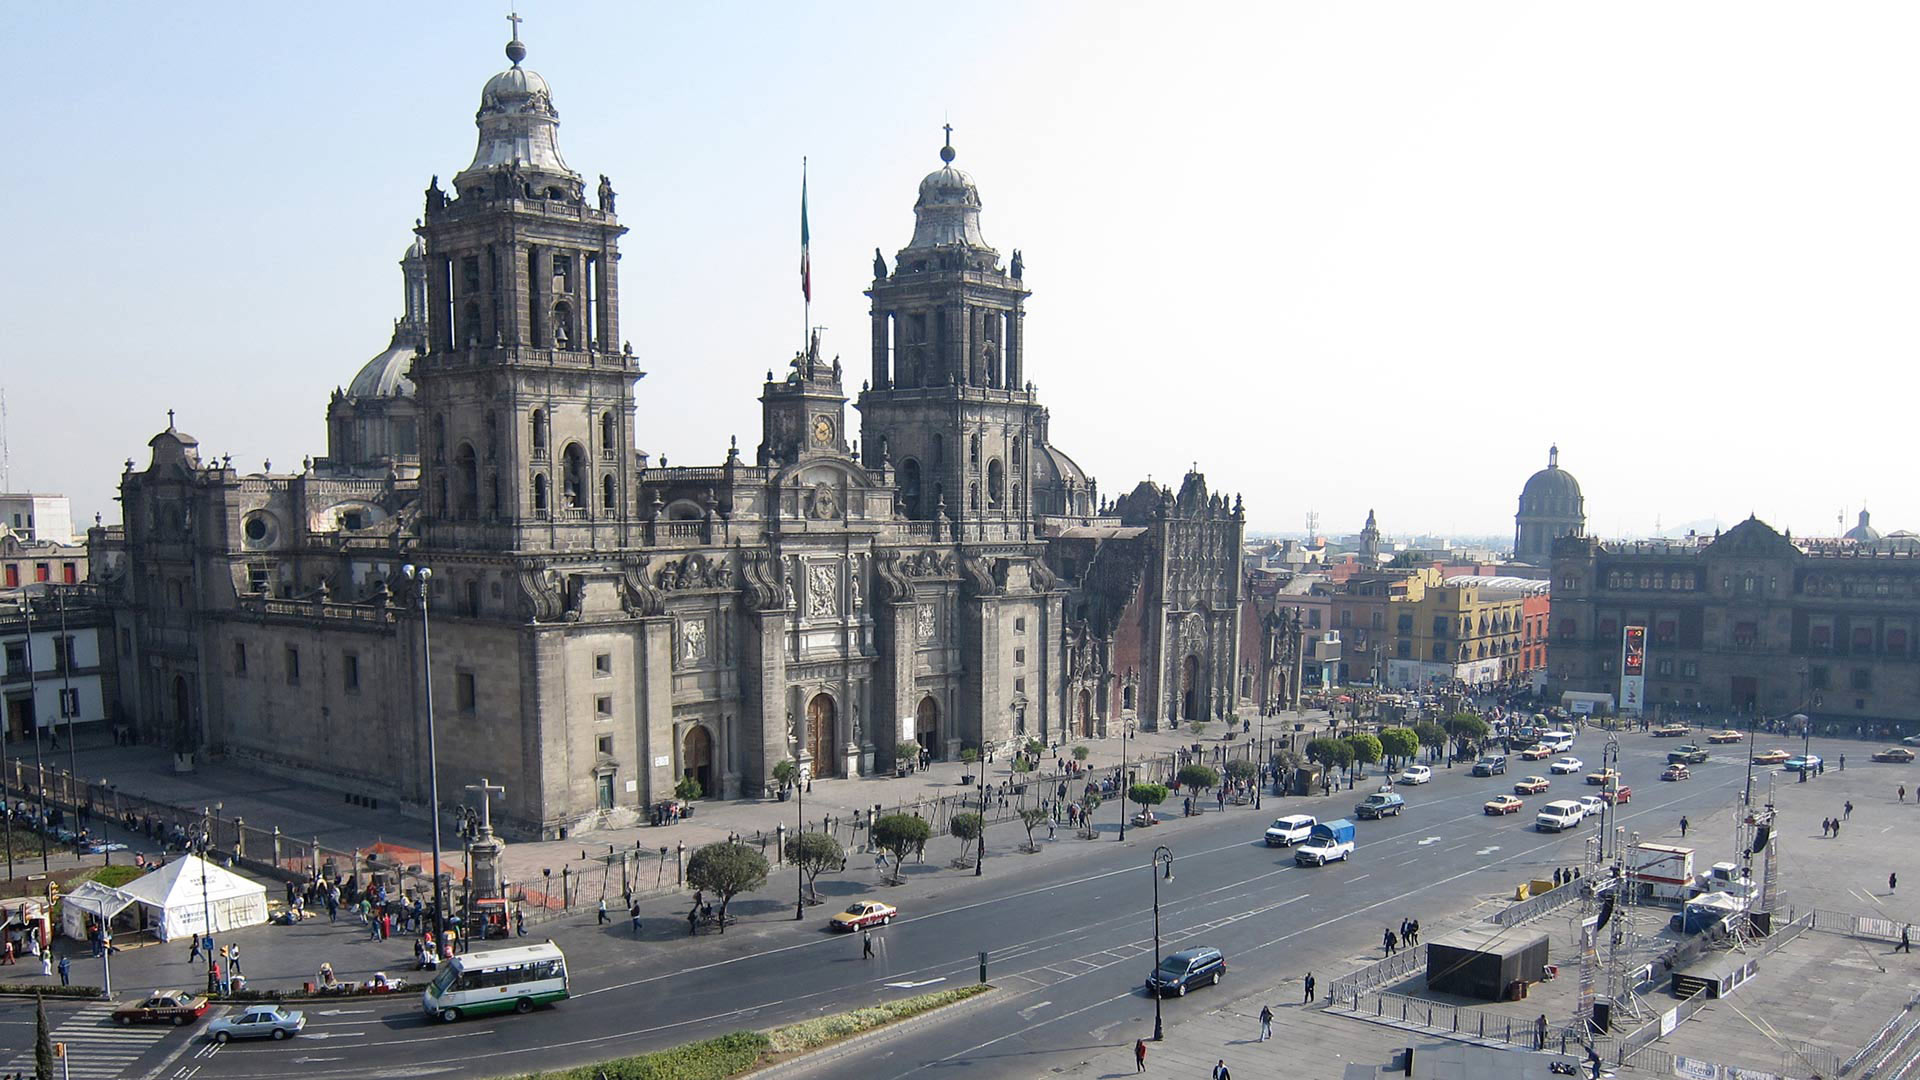 The cathedral in the Zócalo, or central plaza, of Mexico City.